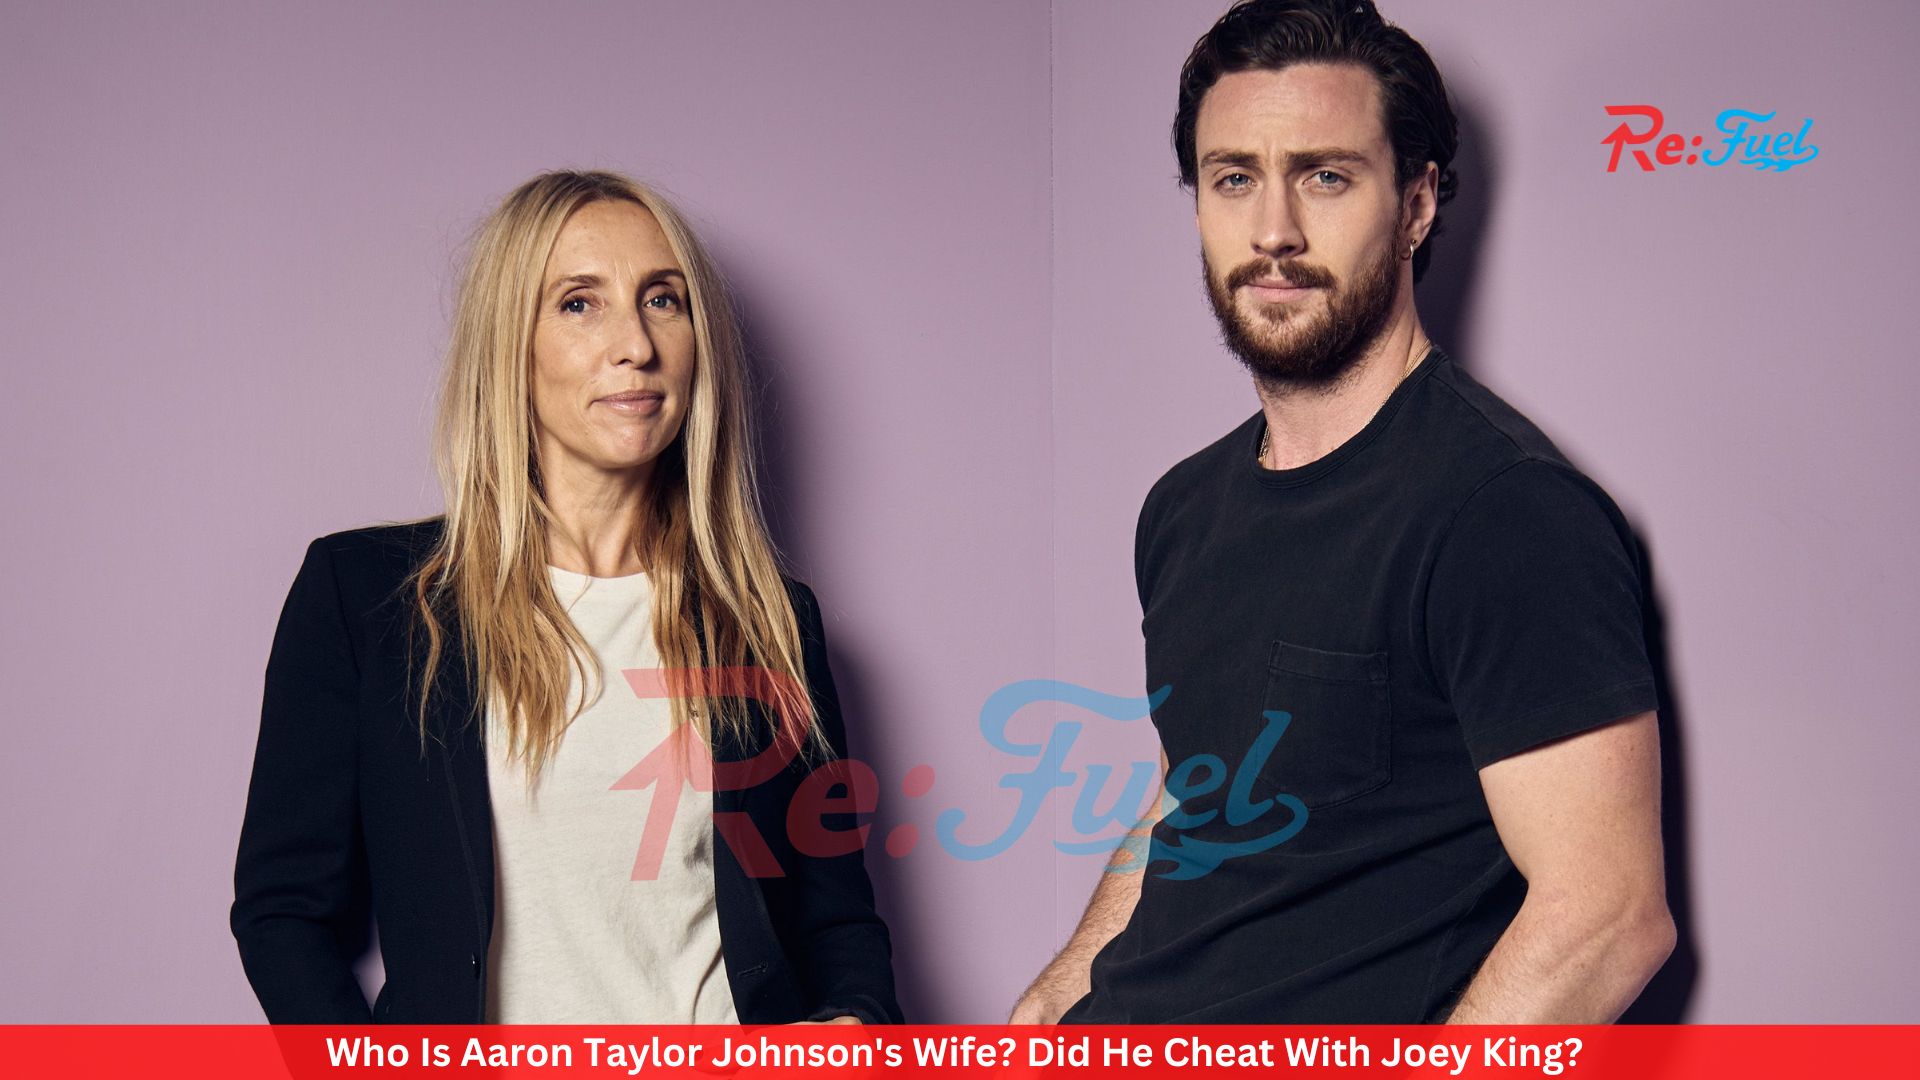 Who Is Aaron Taylor Johnson's Wife? Did He Cheat With Joey King?